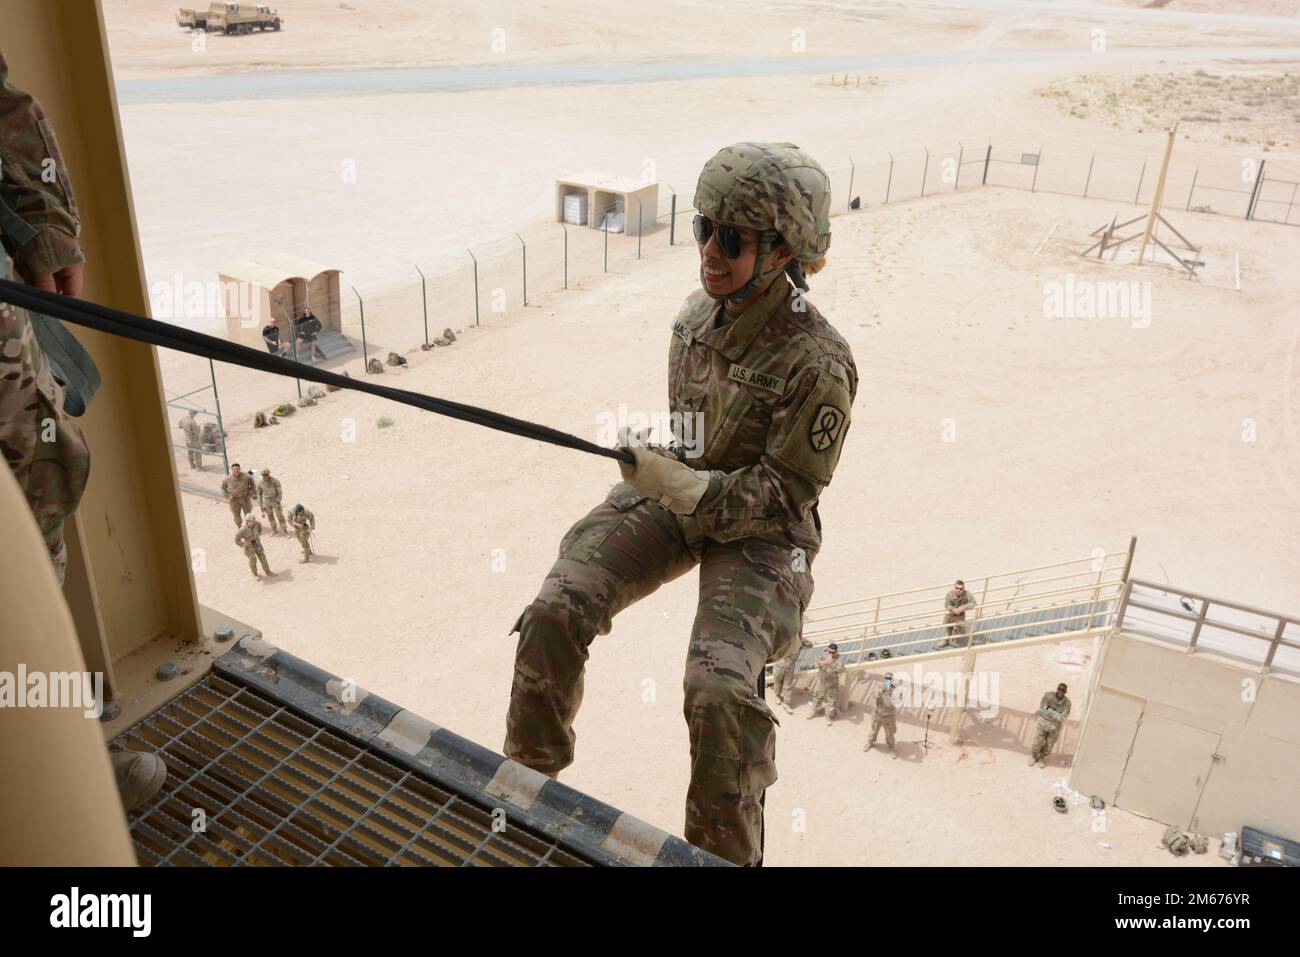 CPL Macias, Karla from the 295th Ordinance Co. Stands in L shape before doing her first bound of the tower.  Repelling Training Given on April 9th 2022 by instructors from the 295th Ordinance co. at Camp Buehring Kuwait.  (photo by SFC Delgado, Ramon) Stock Photo